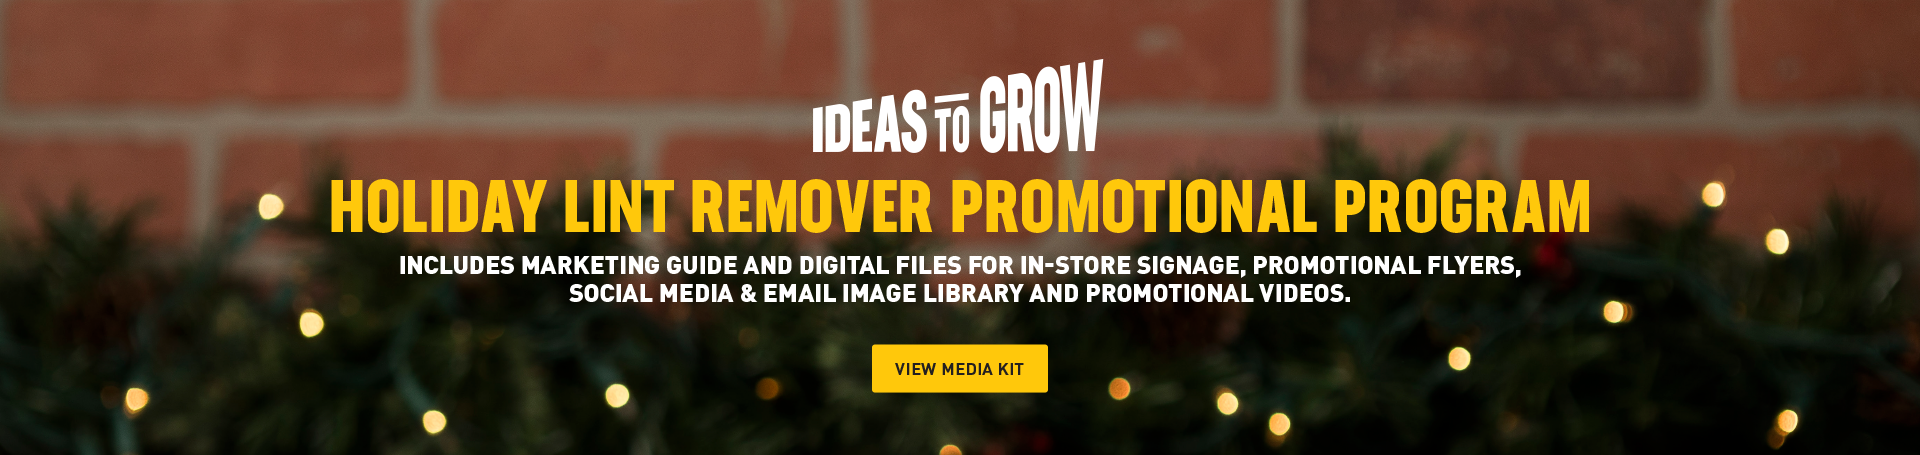 Ideas to Grow Holiday Lint Remover Promotional Program